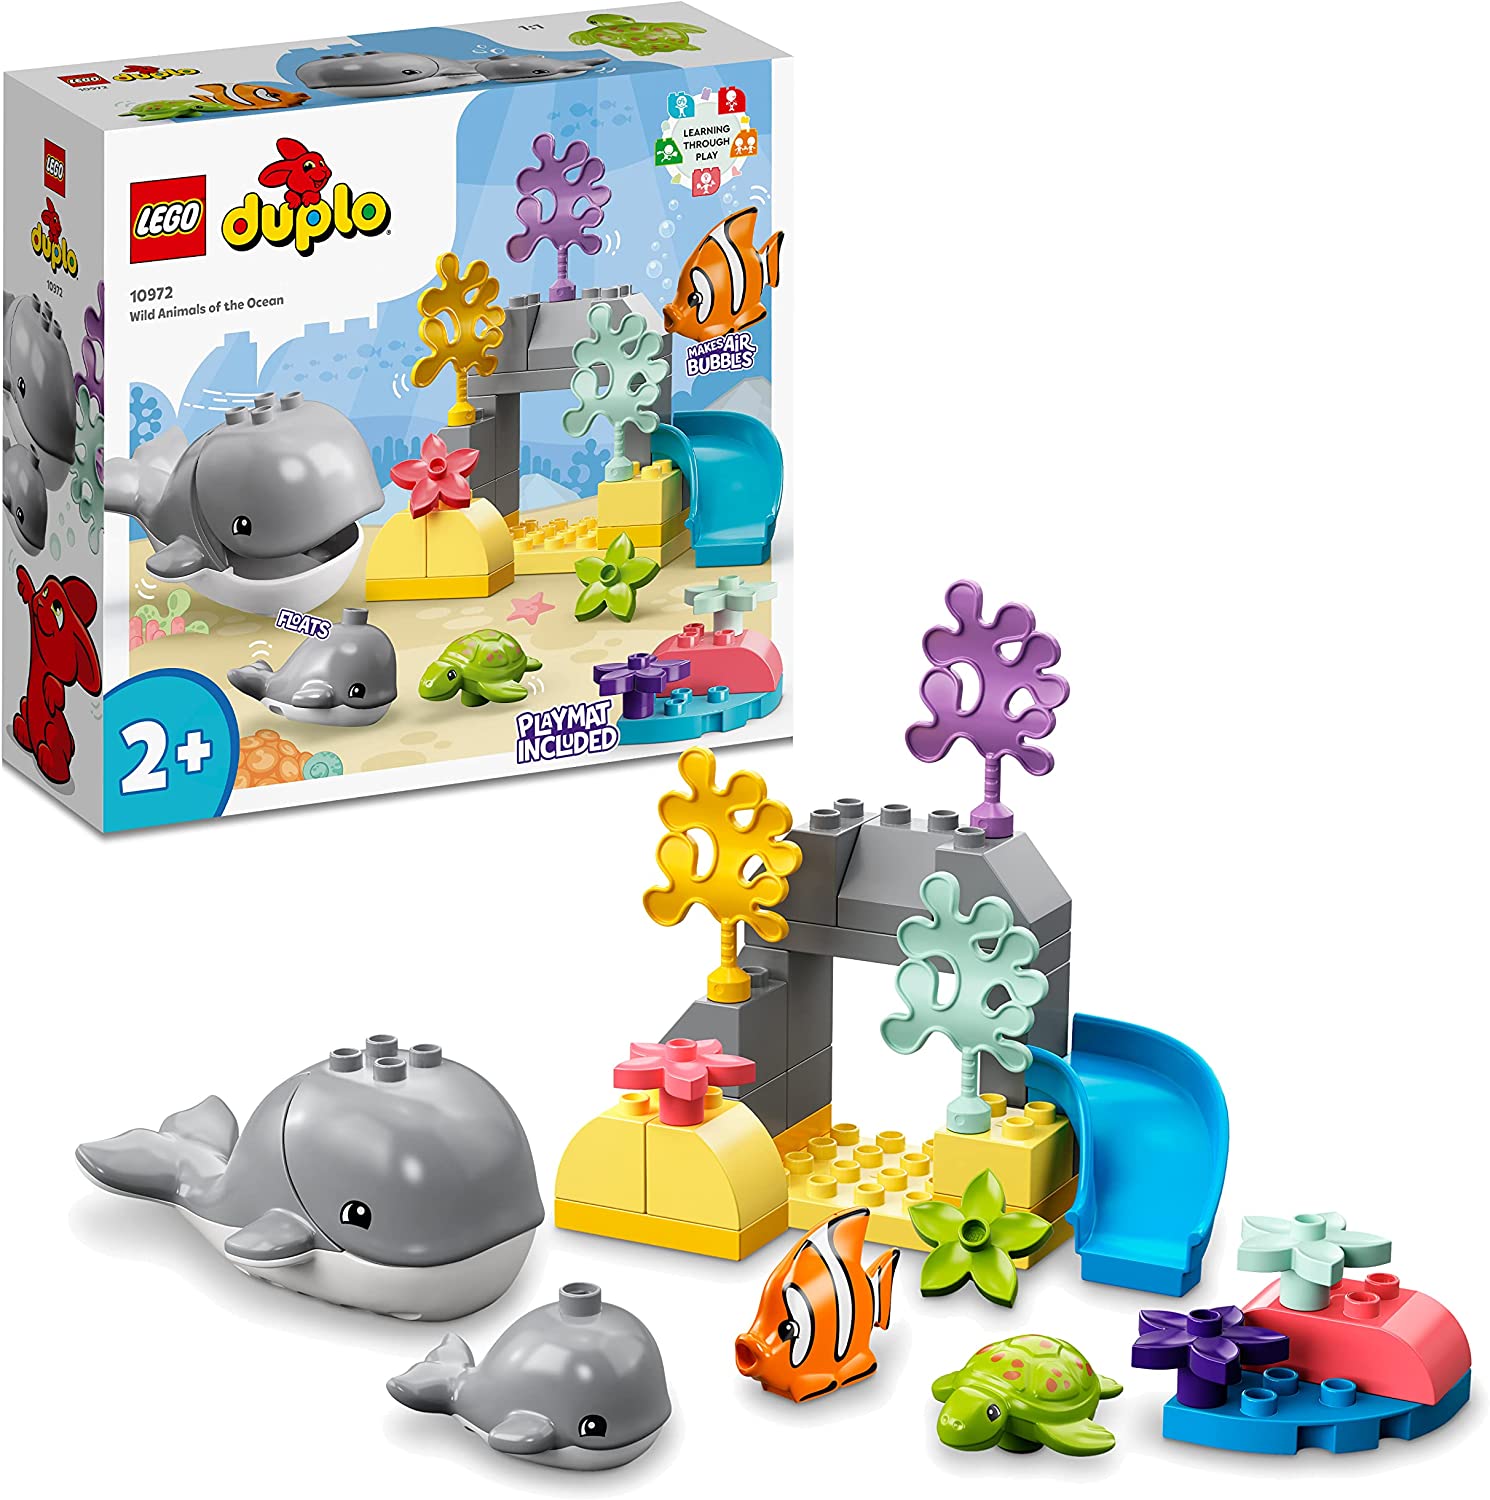 LEGO 10972 DUPLO Wild Ocean Animals Toy Set for Toddlers with Sea Animals and Play Mat, Educational Toy from 2 Years